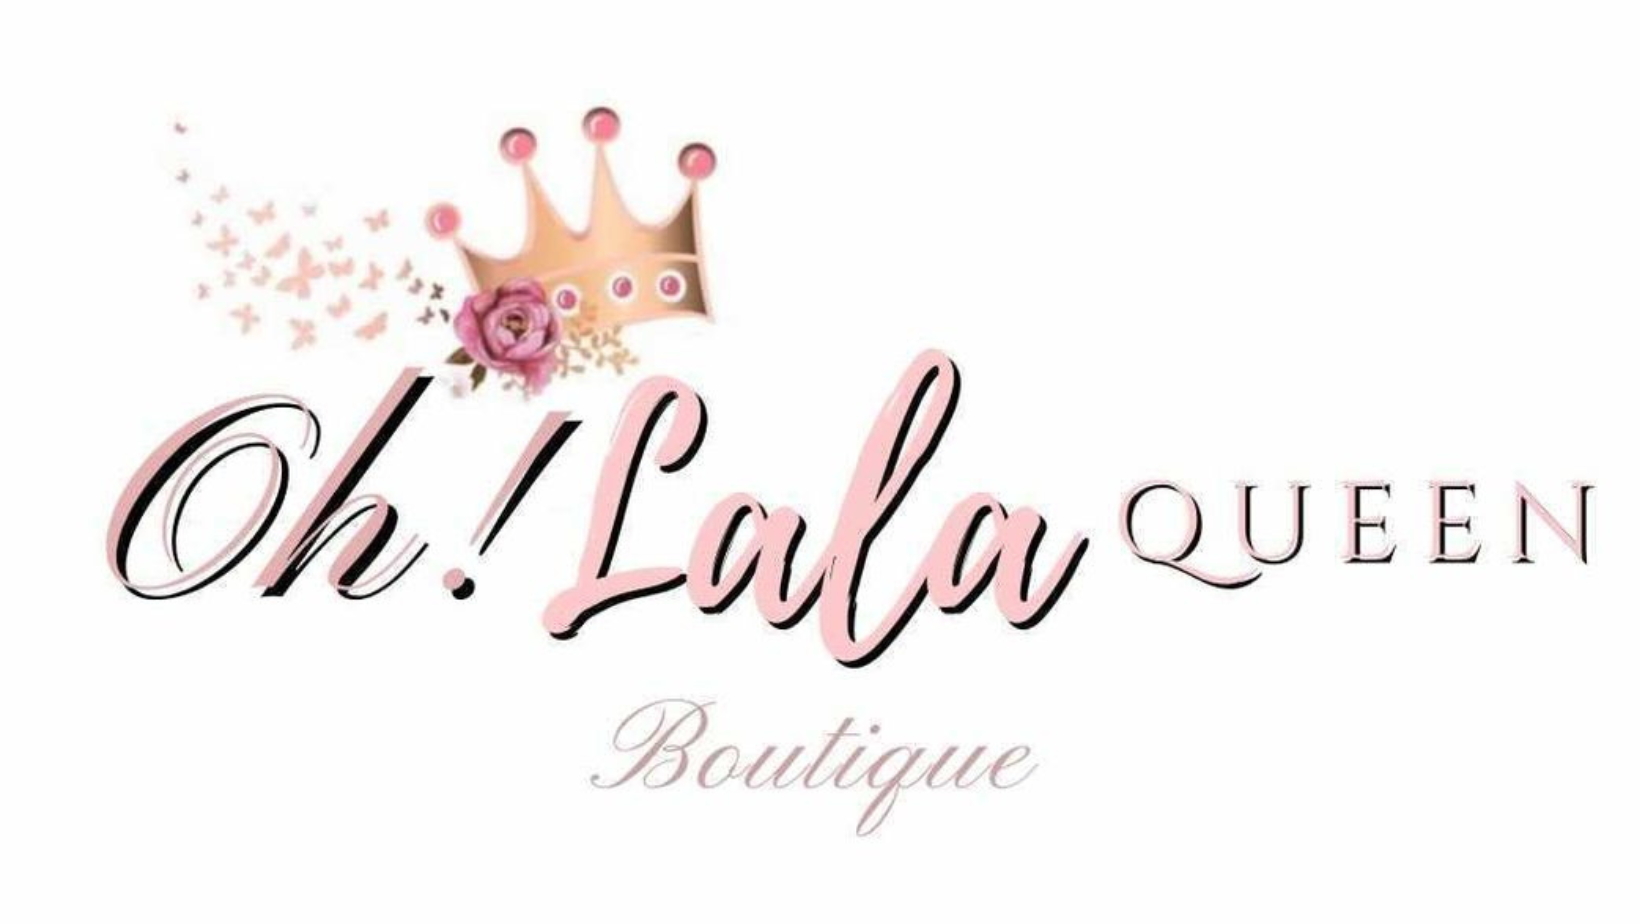 Oh! LaLa Queen Boutique 